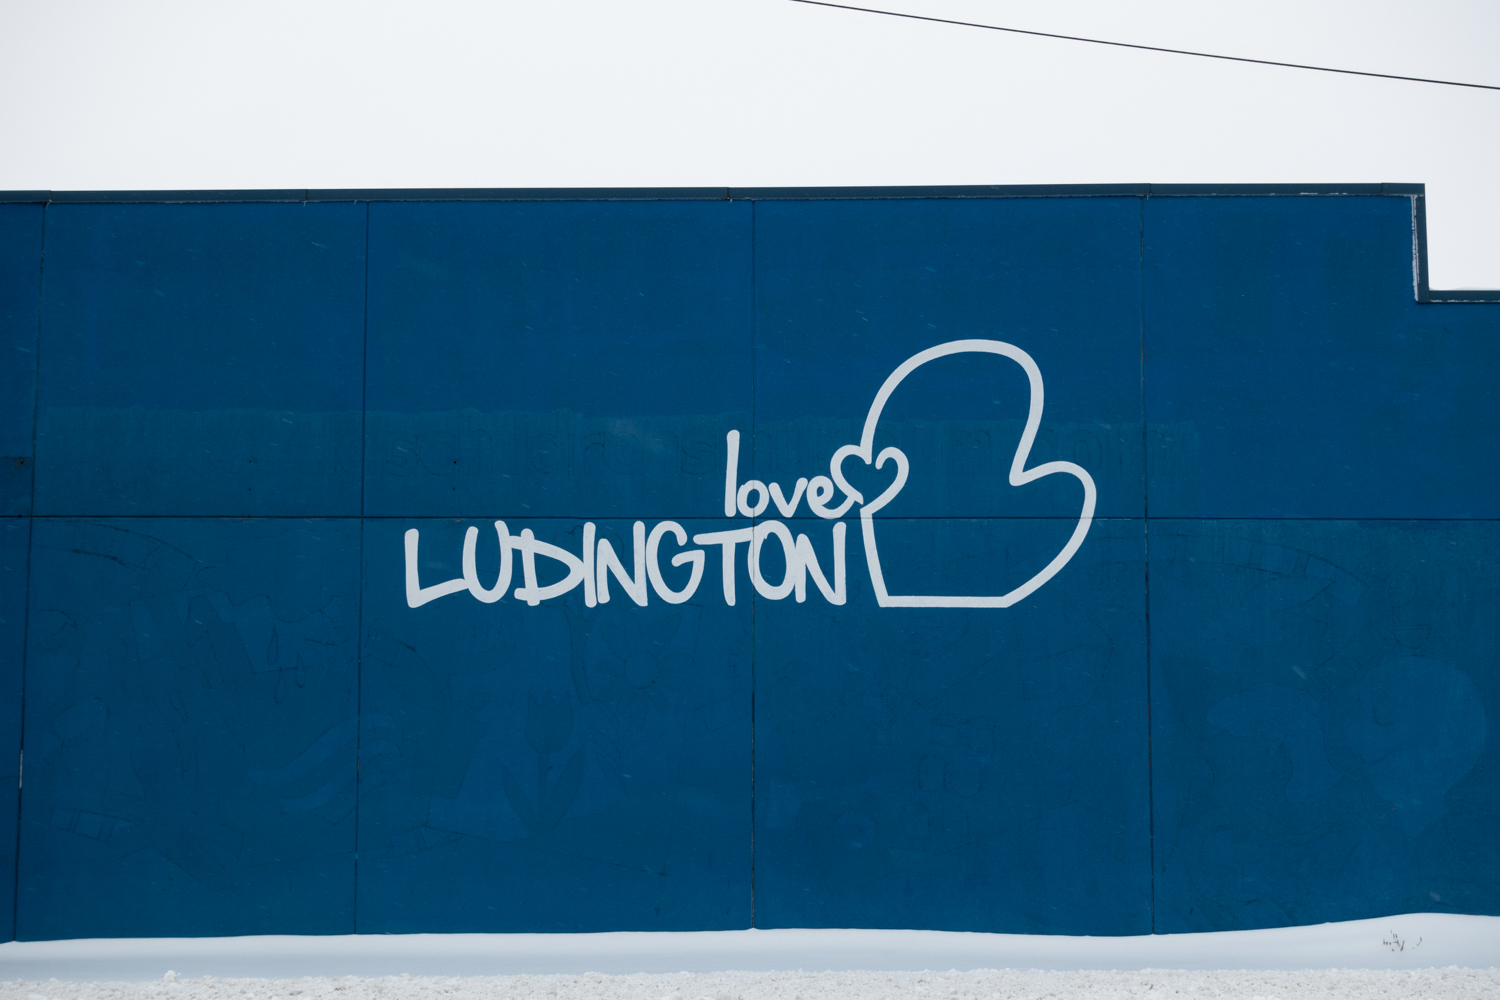 Ludington, Michigan Winter Getaway: What to See, Do and Eat: a travel guide on what to see, do and eat in Ludington, Michigan during the winter.  #michigan #travel #ludington